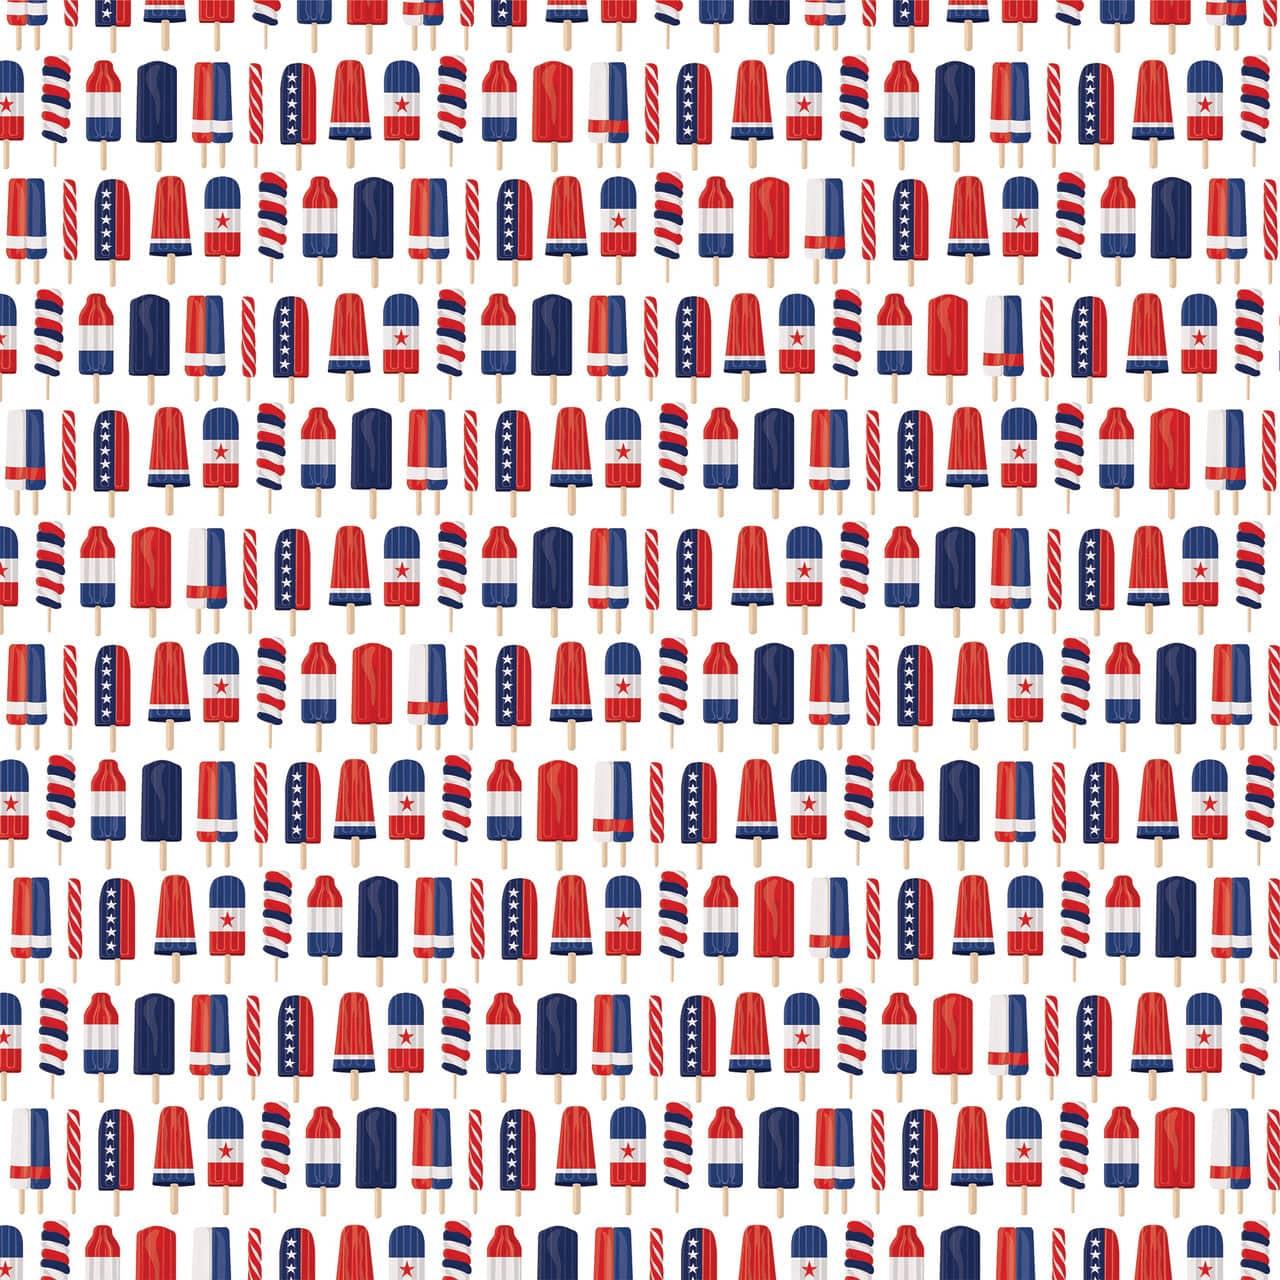 Fourth of July Collection Festive Popsicle 12 x 12 Double-Sided Scrapbook Paper by Carta Bella - Scrapbook Supply Companies